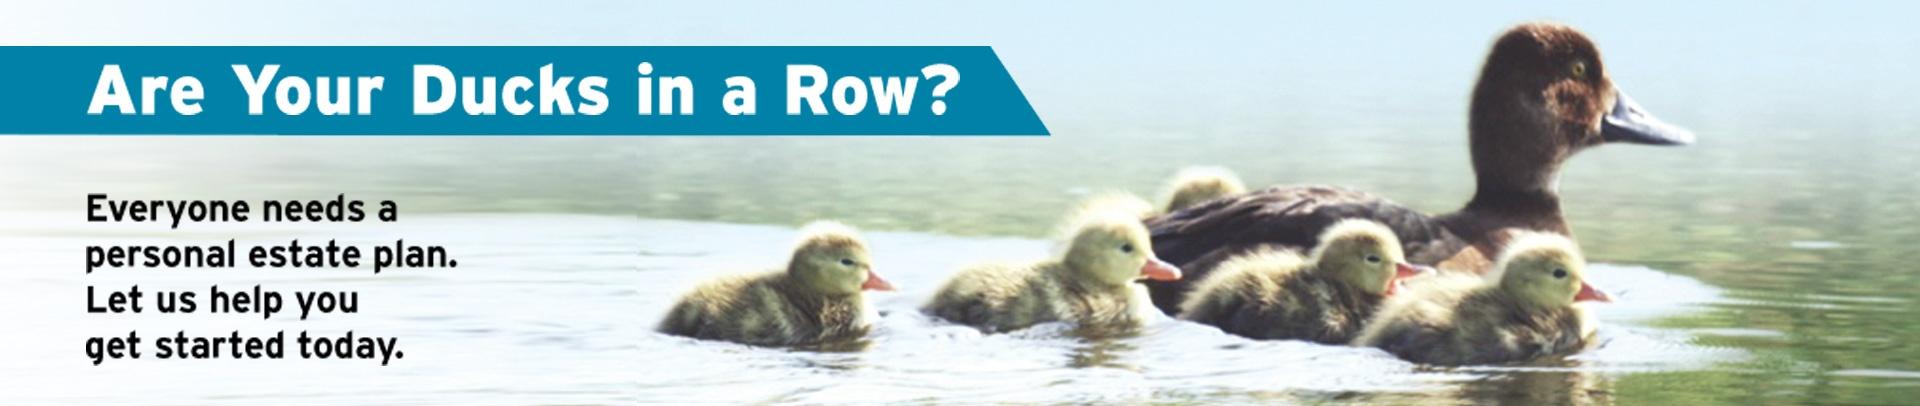 Ducks on Water: "Are Your Ducks in a Row? Everyone need a personal estate plan. Let us help you get started today."